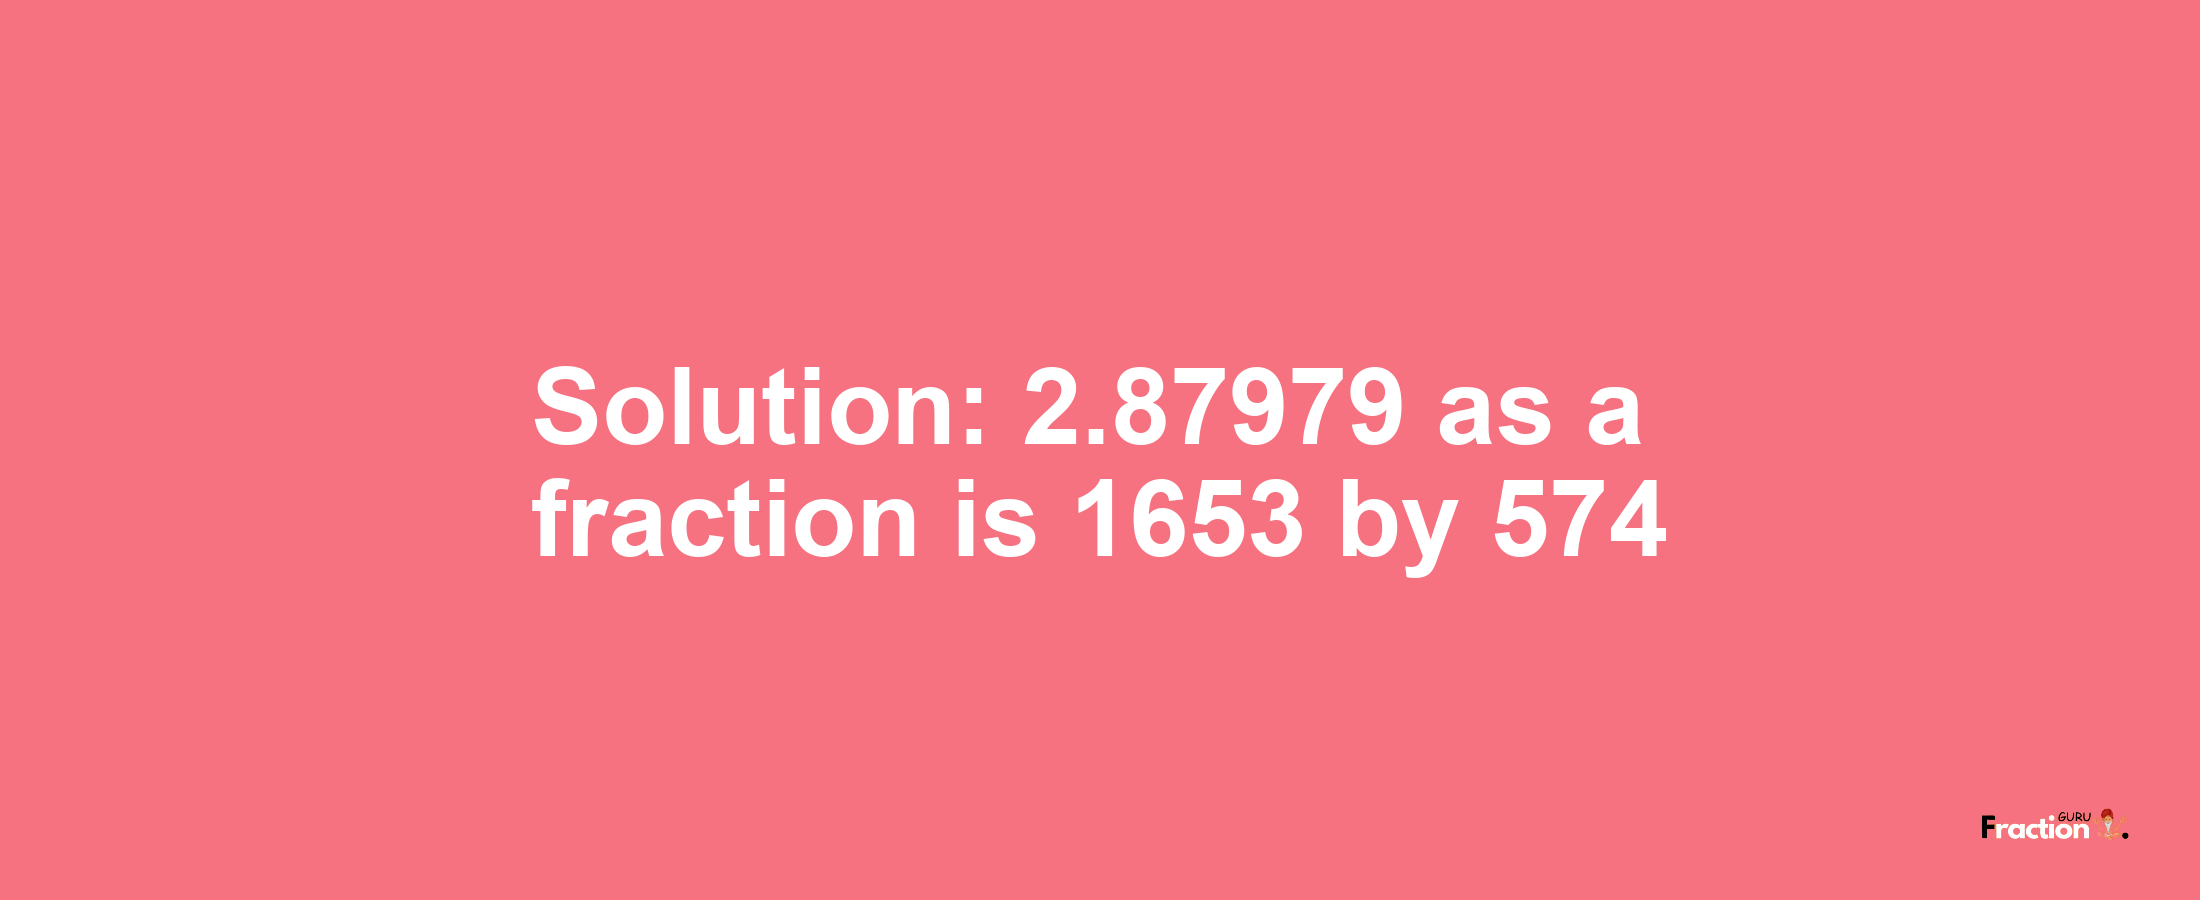 Solution:2.87979 as a fraction is 1653/574